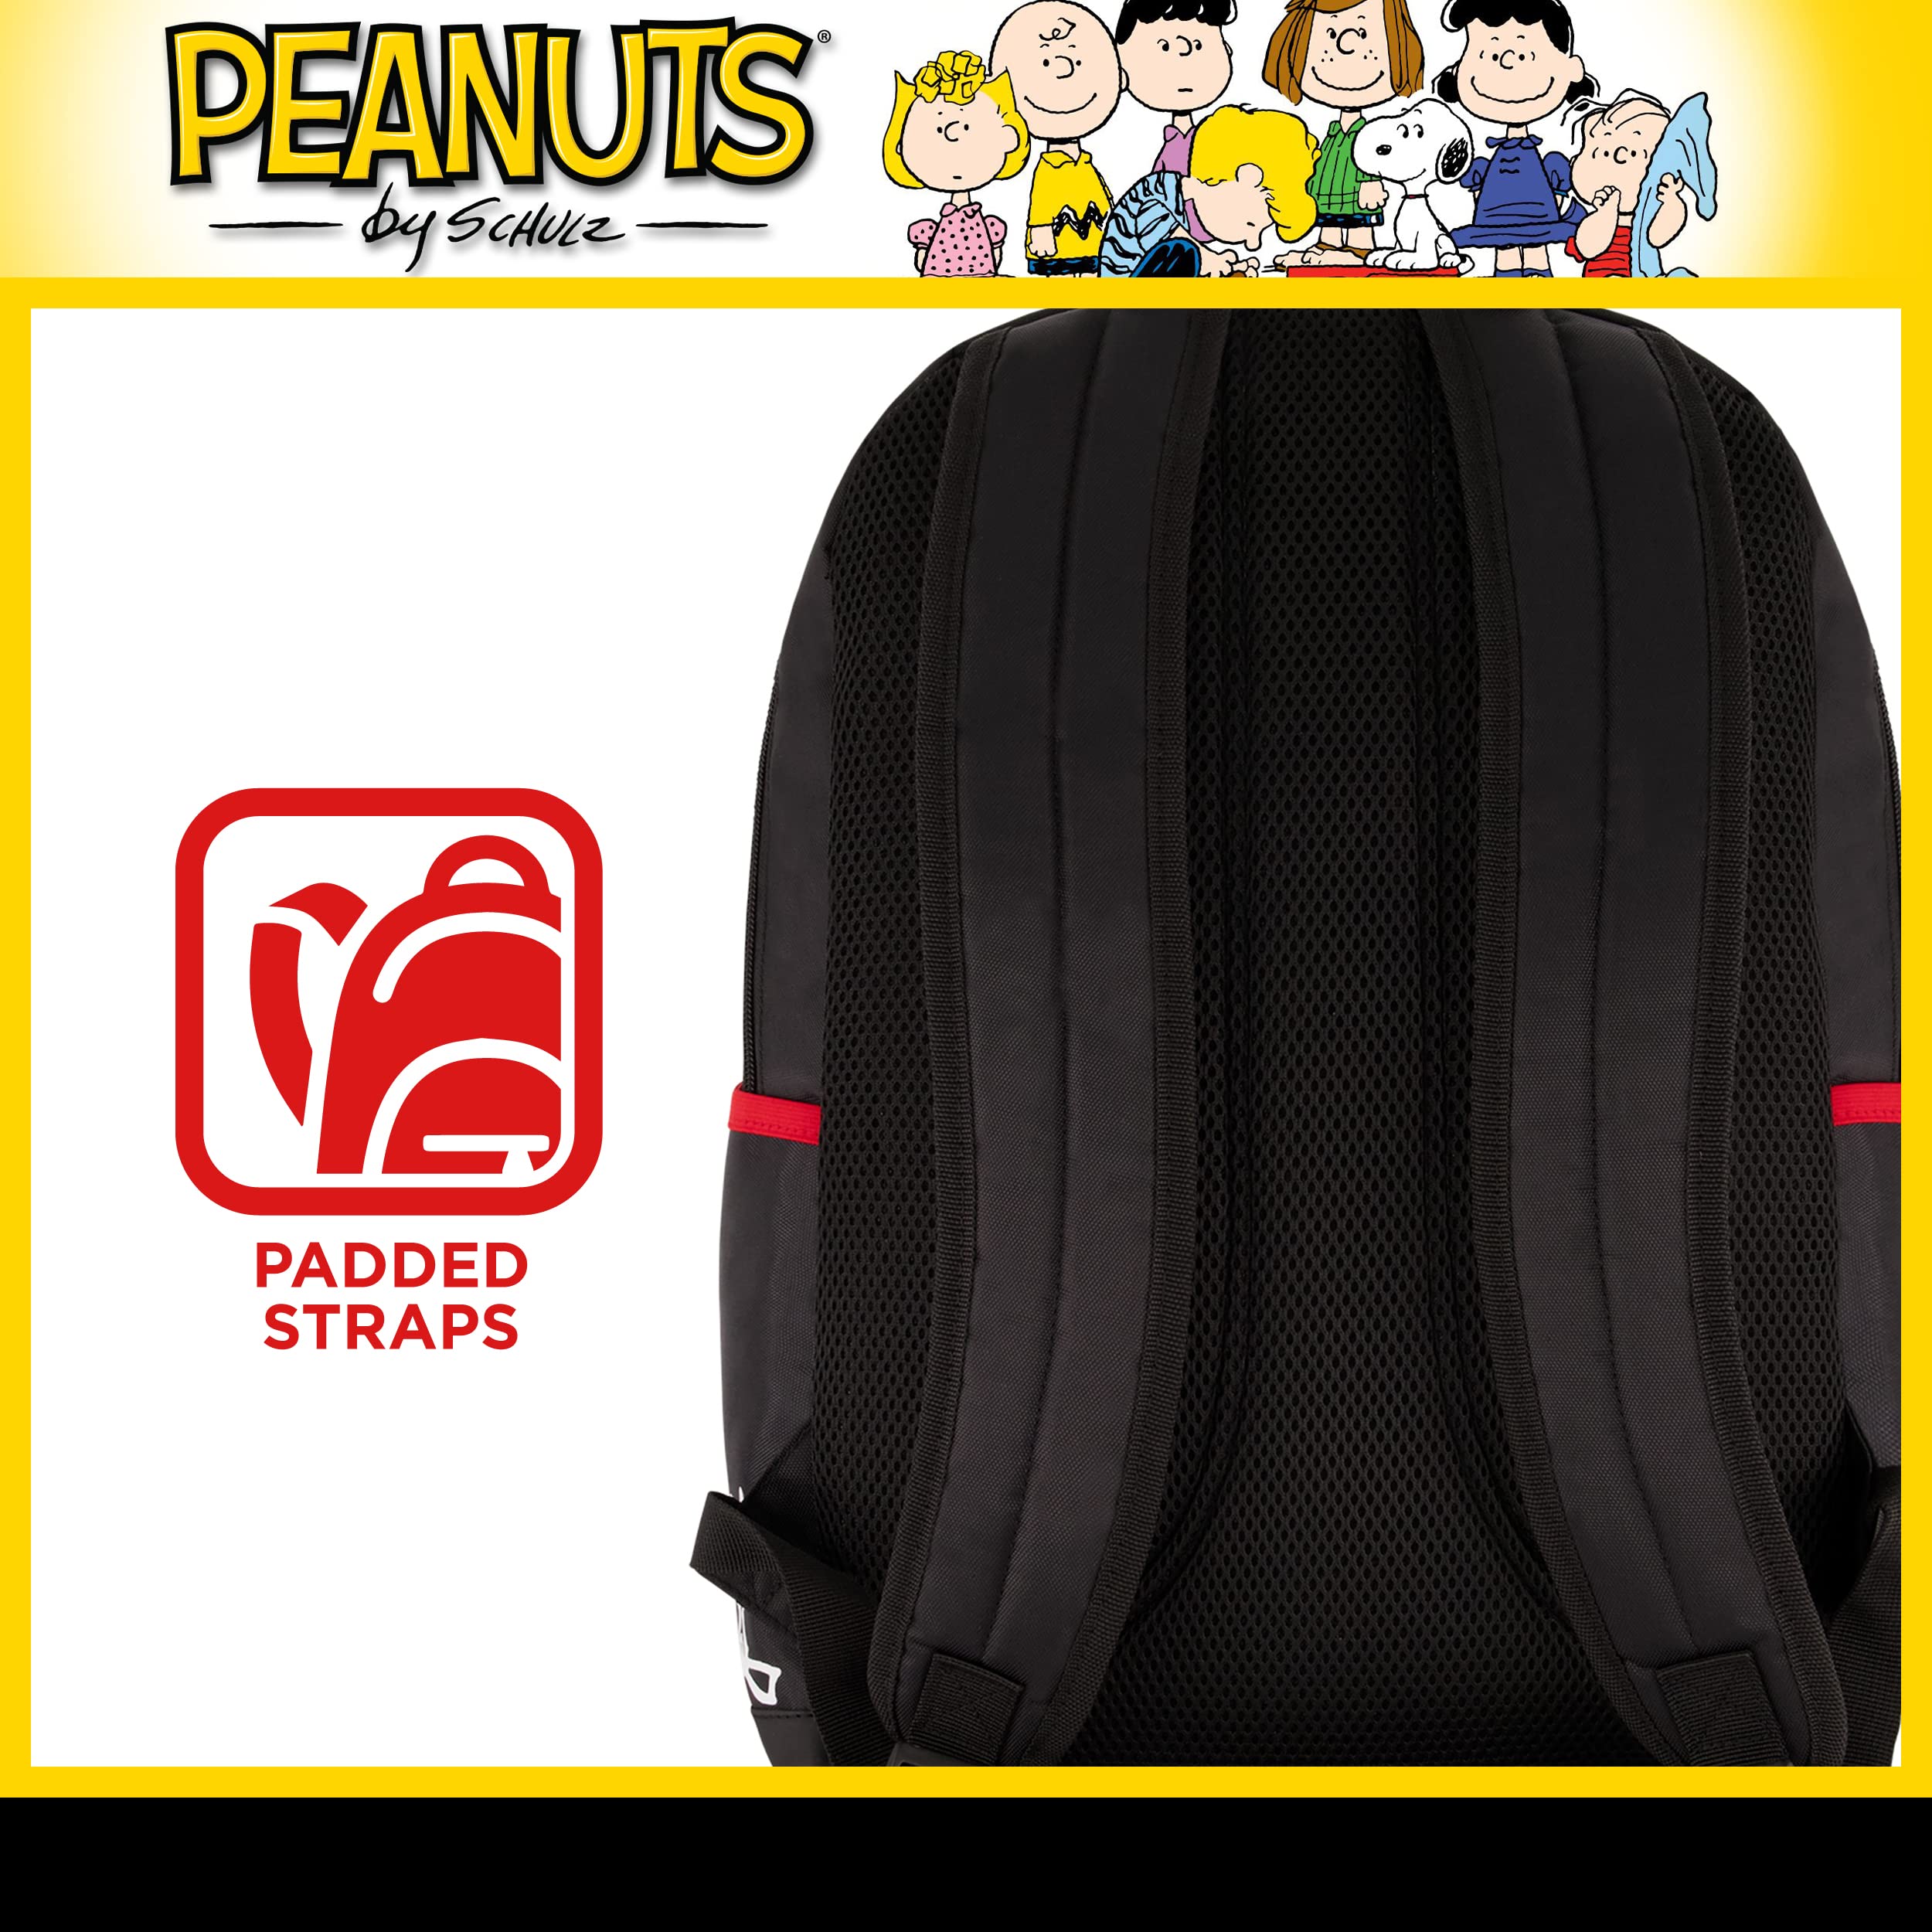 Peanuts 13 Inch Sleeve Backpack, Snoopy, Charlie Brown and Woodstock Padded Computer Bag for Commute or Travel, Multi